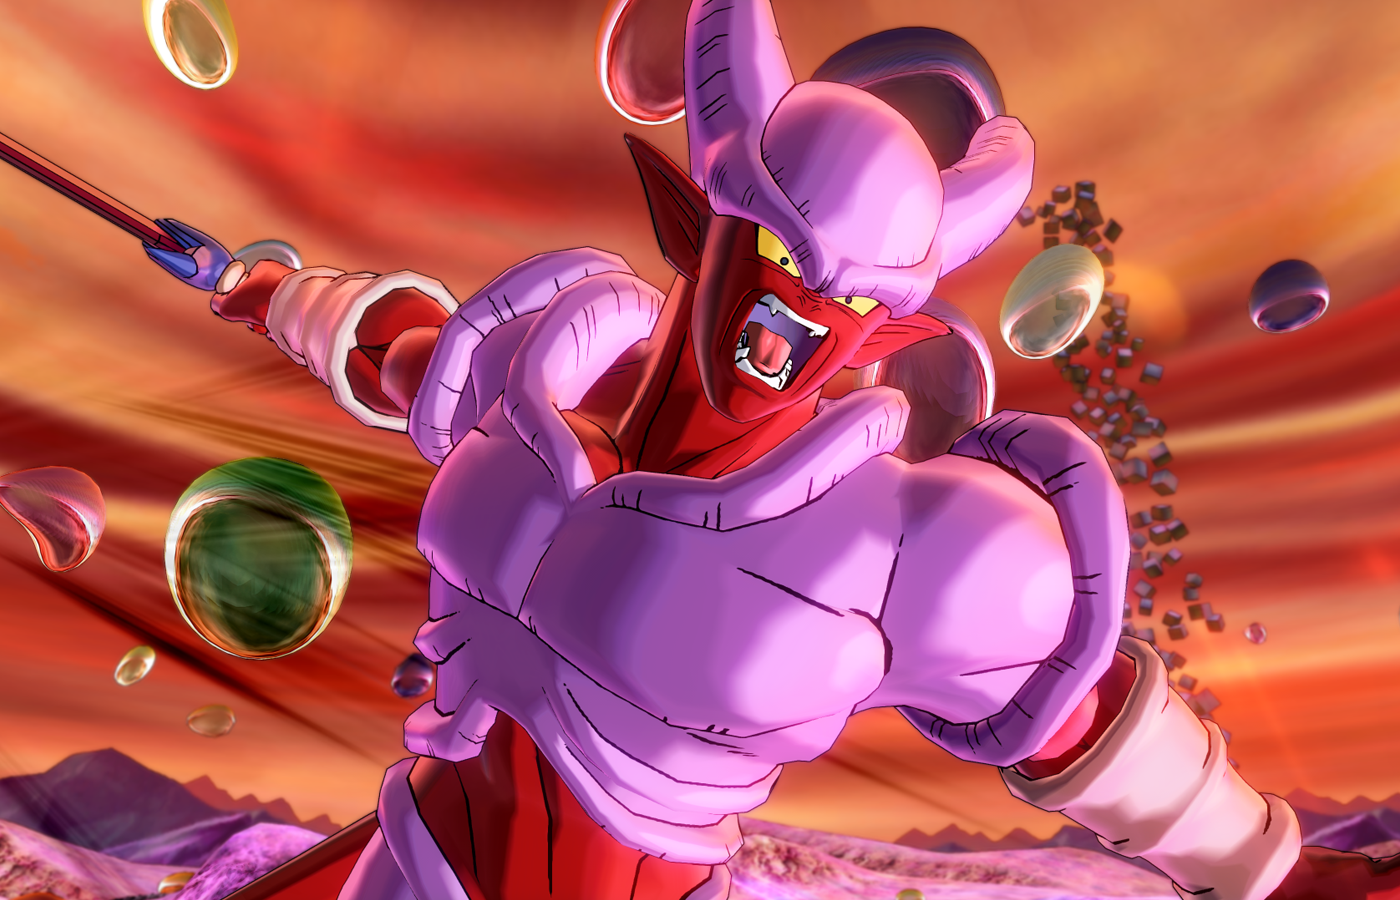 Dragon Ball Xenoverse 2 Update & DLC Available This February - Gameranx